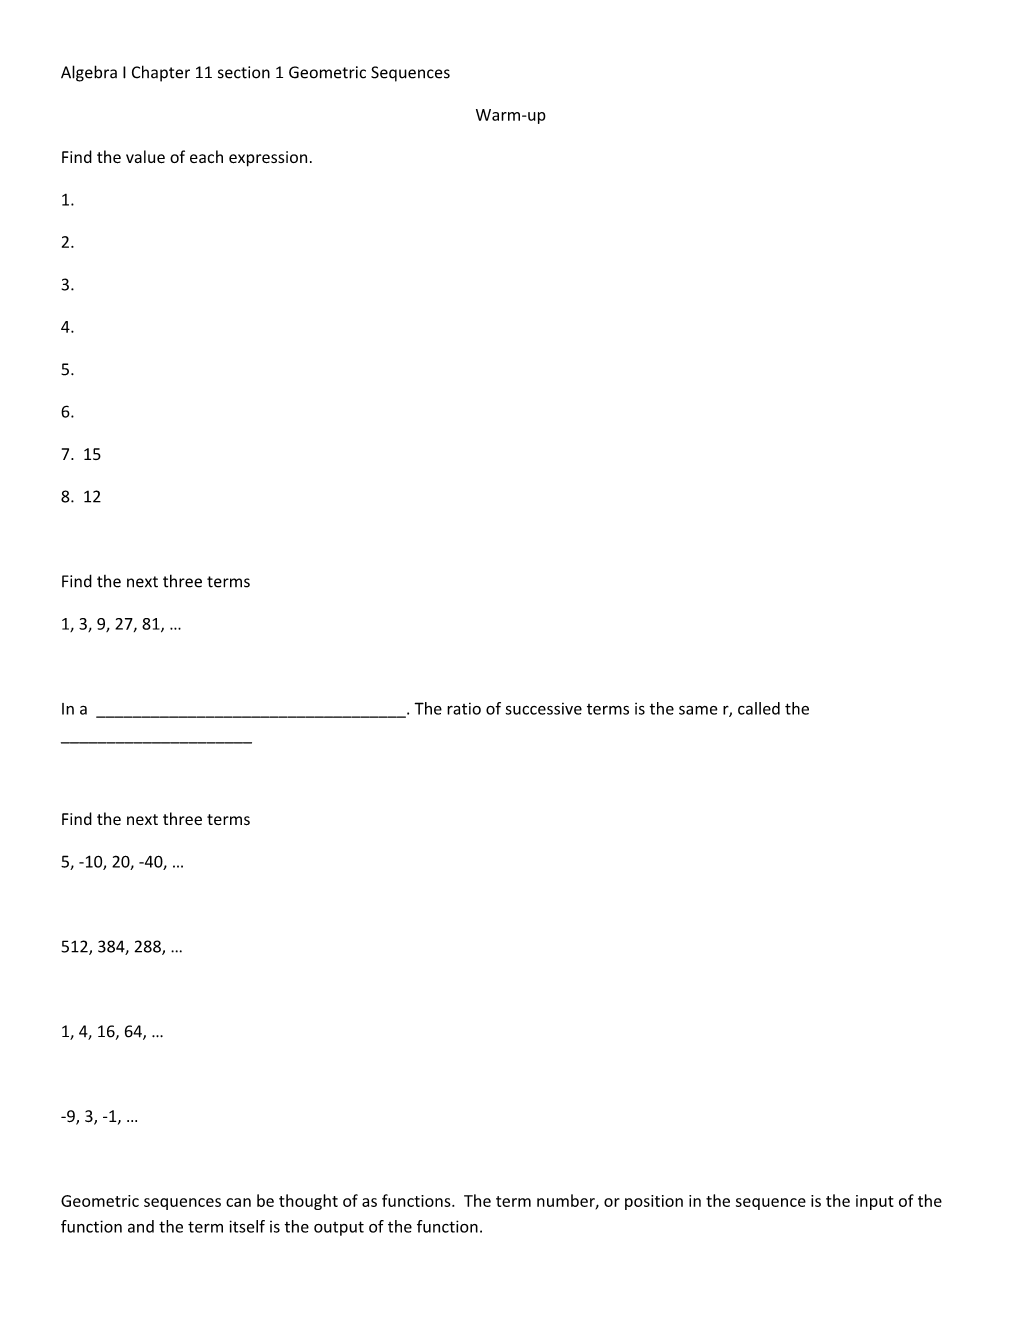 Algebra I Chapter 11 Section 1 Geometric Sequences